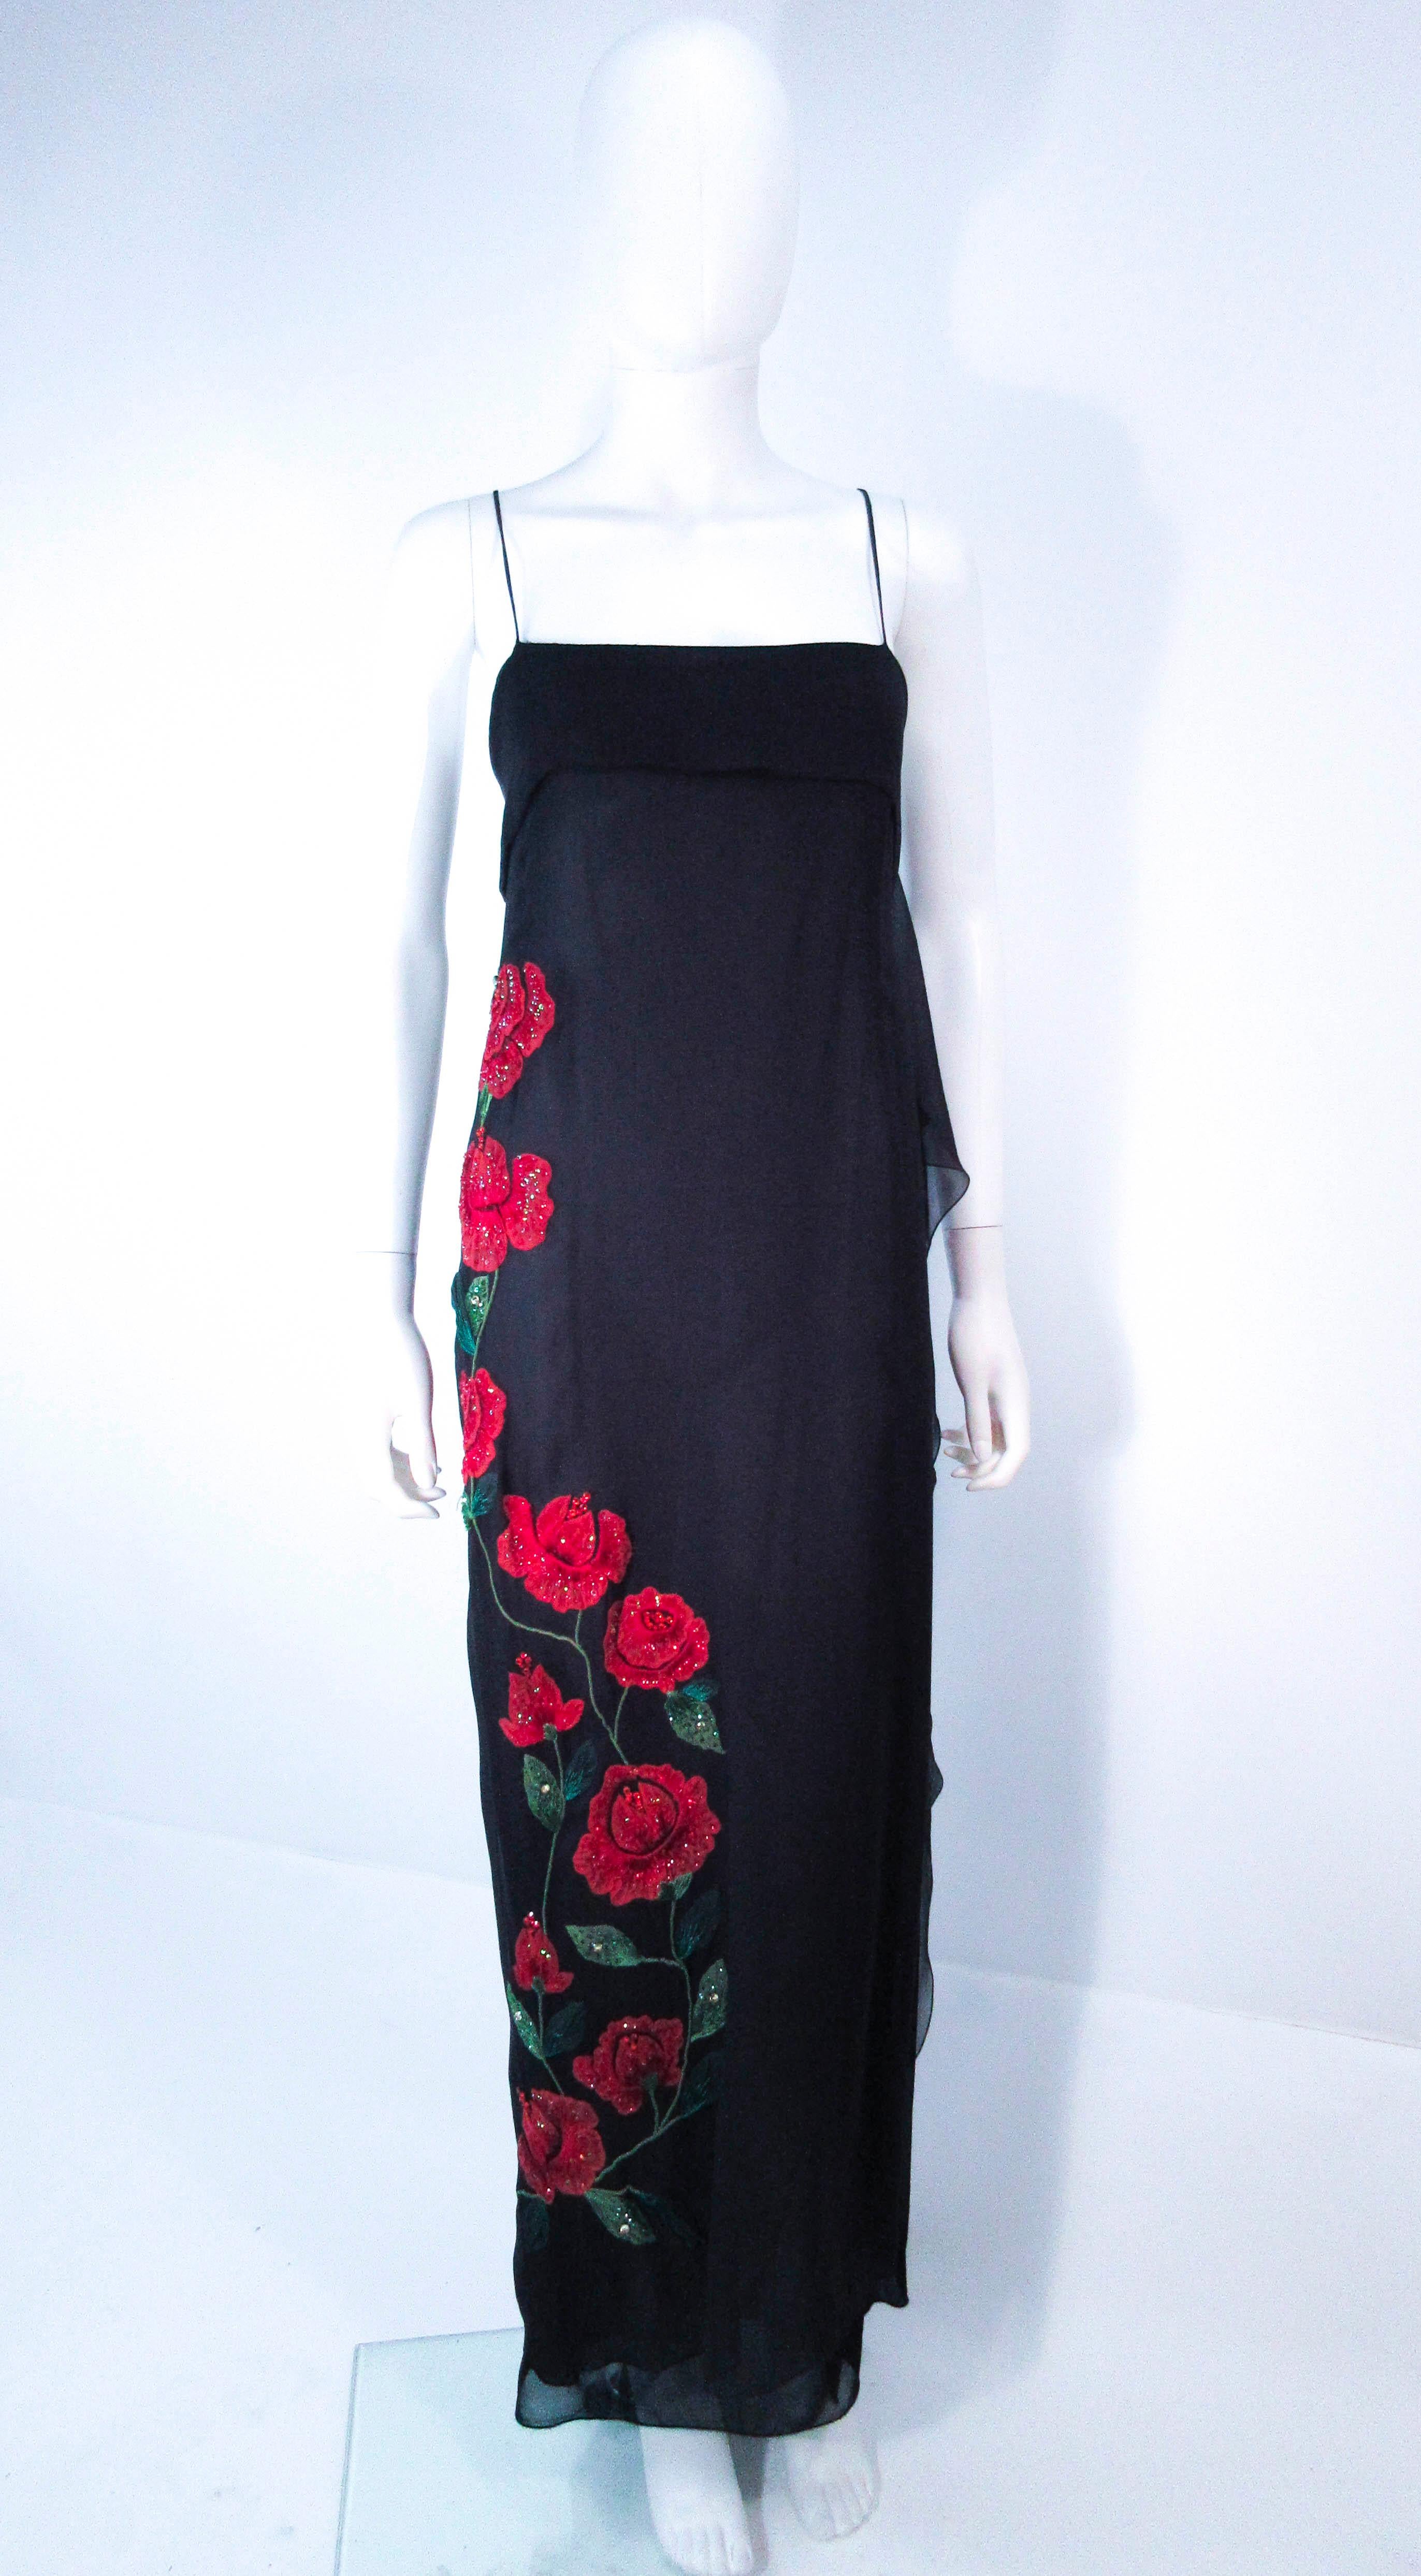 This Bluemarine gown is composed of a sheer black silk chiffon and features a beautiful side cascade with rose applique. There is a zipper closure. In excellent vintage condition (light signs of wear due to age, see photos, and two small mends which